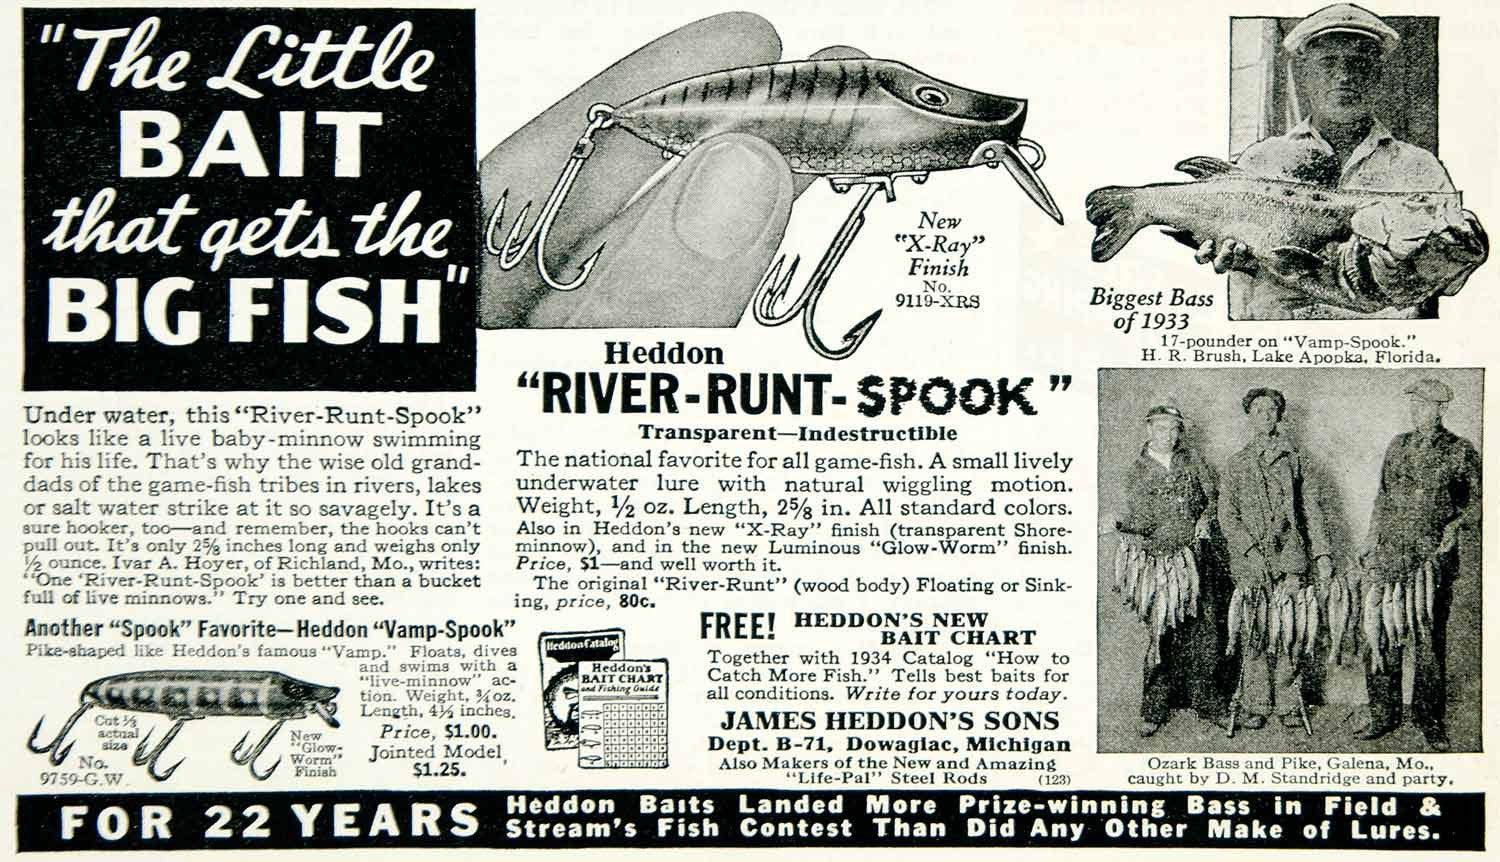 1934 Ad James Heddon Sons River Runt Spook Fishing Lure Bait Tackle YASF1 - Period Paper
